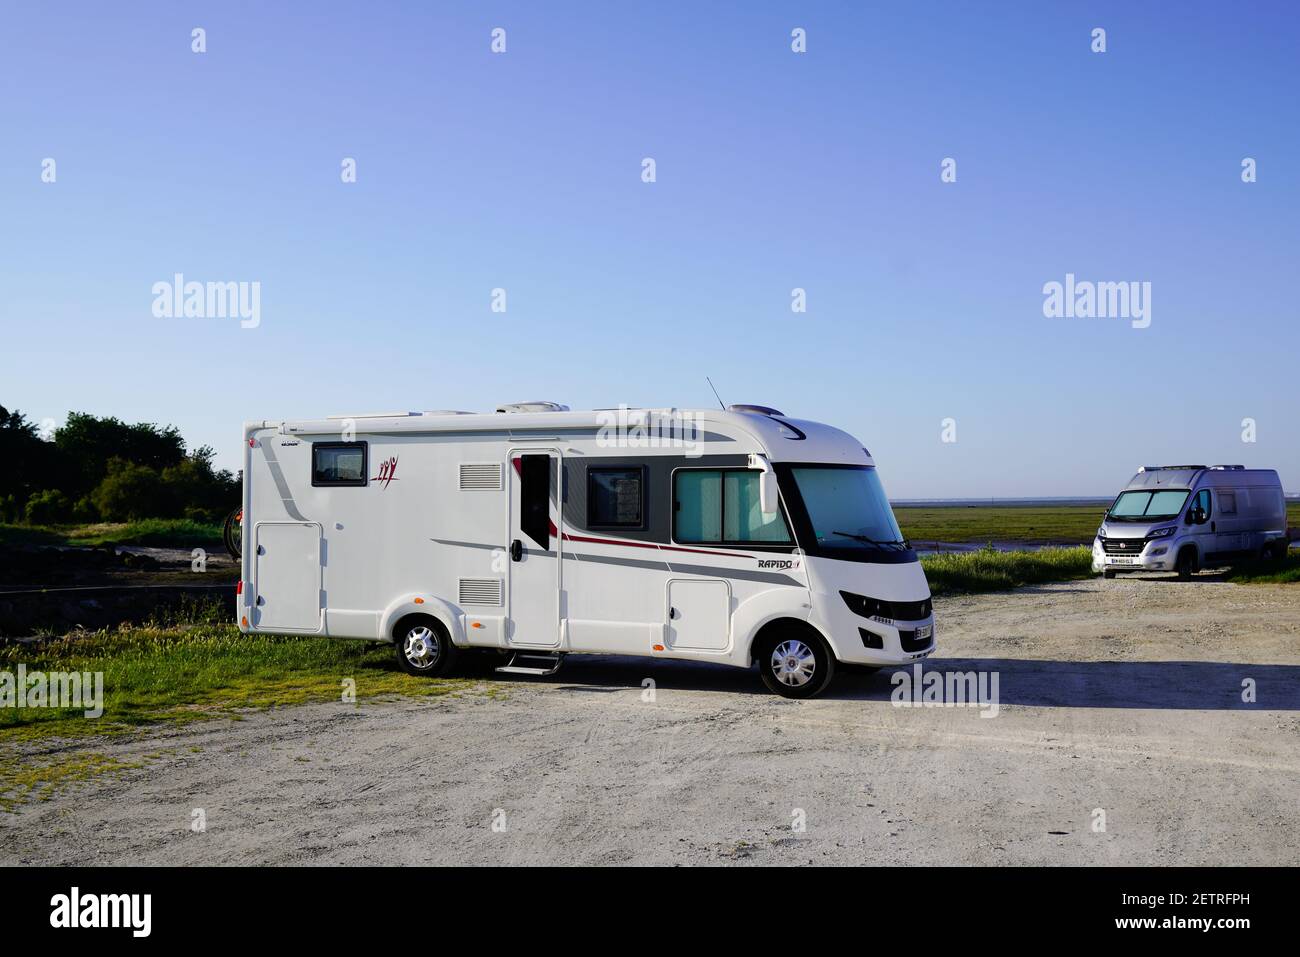 ares, Aquitaine / France - 12 12 2020 : Rapido 896F campervan parked by the sea side Stock Photo